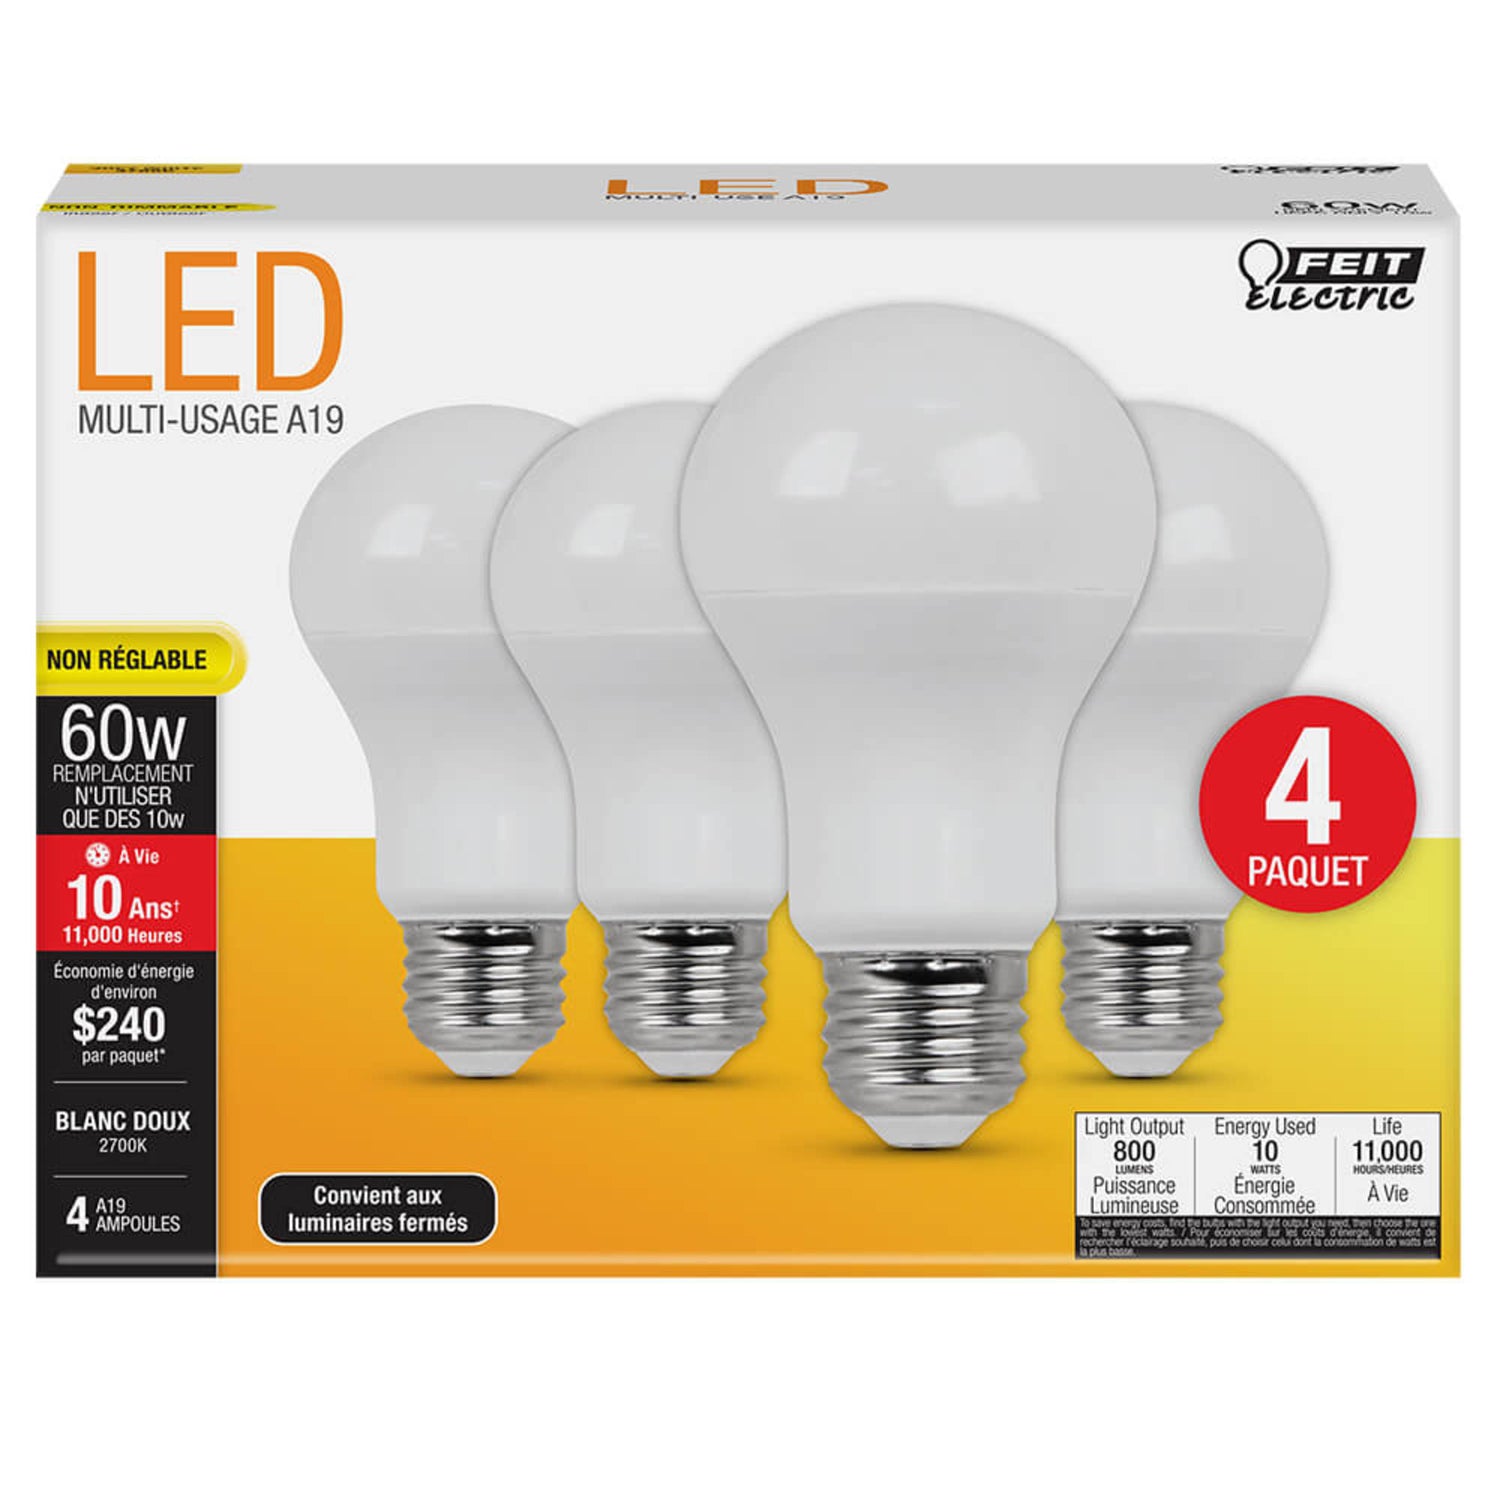 800 Lumens 2700K Non-Dimmable LED